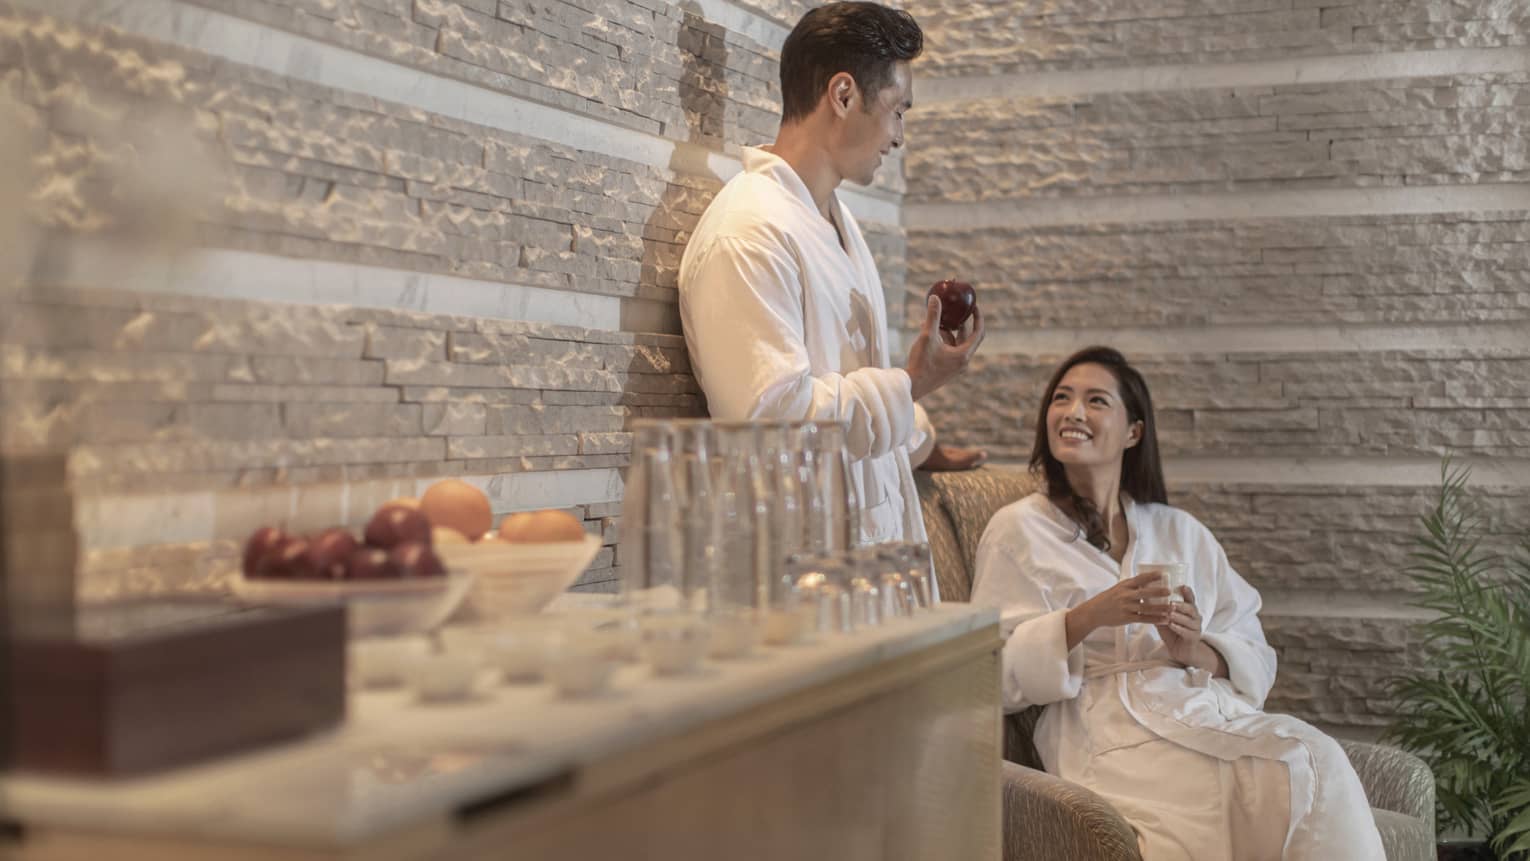 Man and women relax at spa in bathrobes